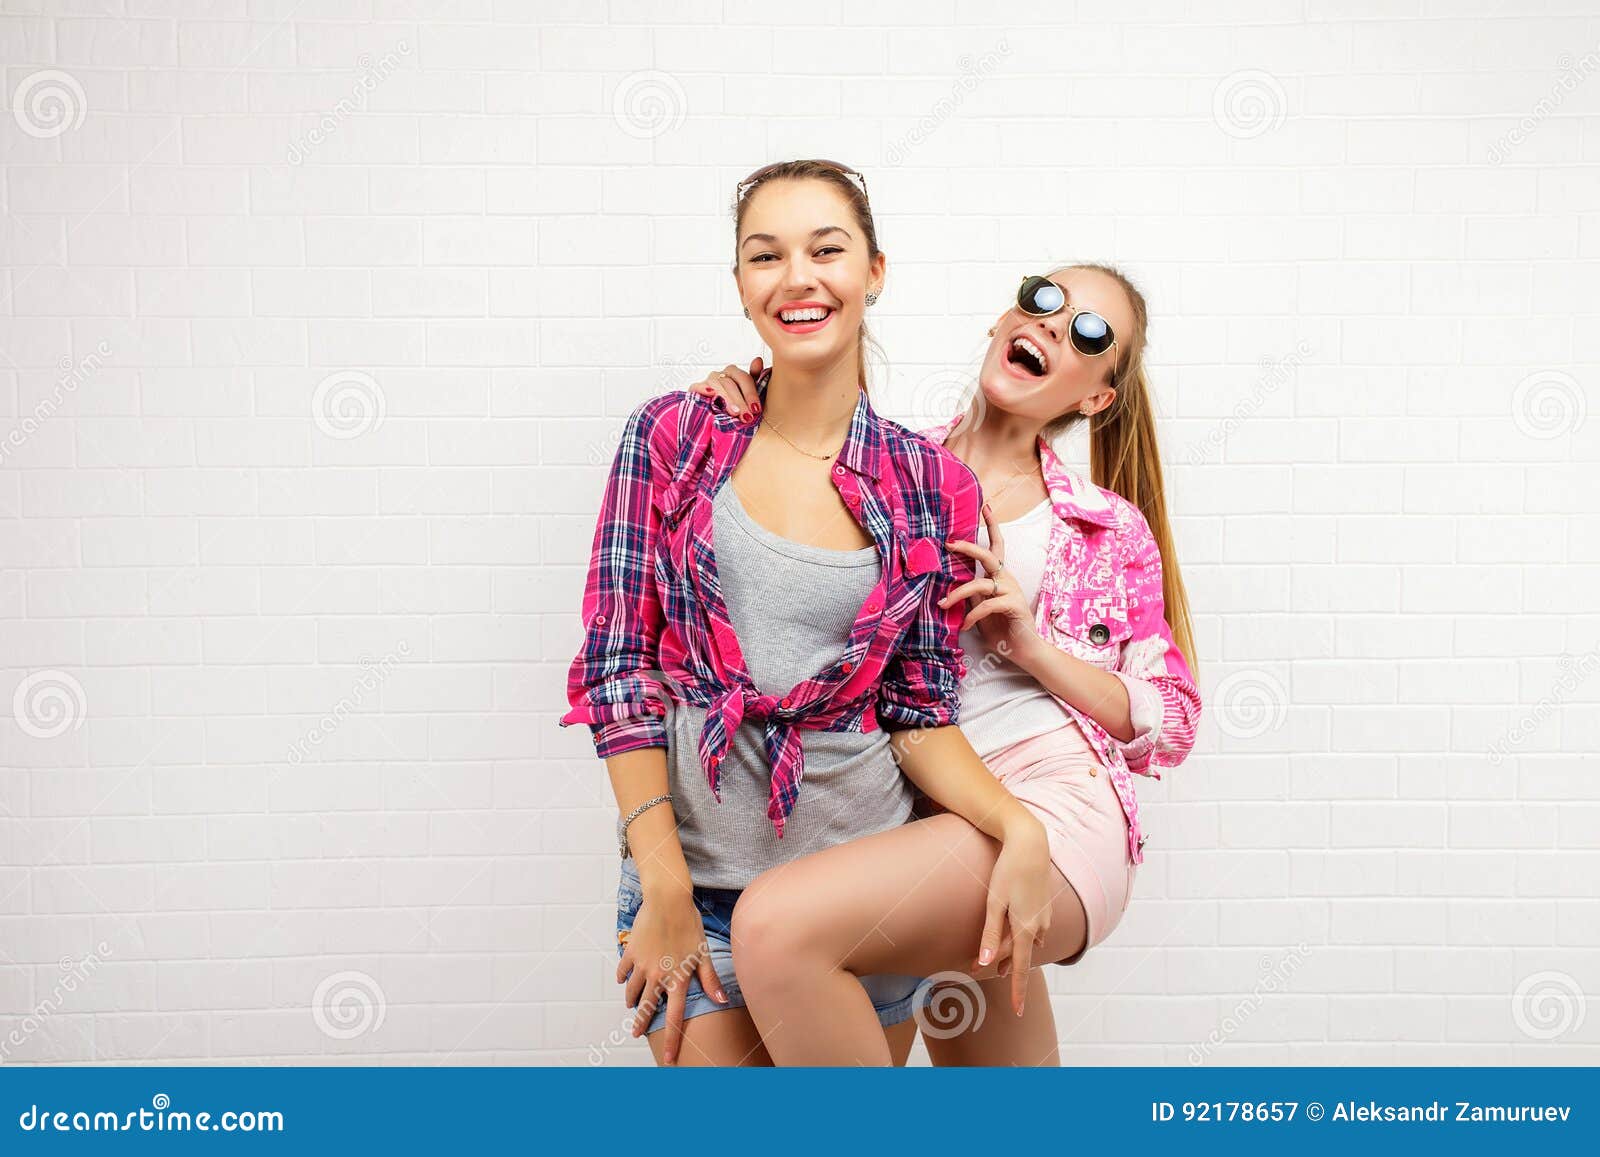 Best Friends Photoshoot Photography Pose Idea Heart Love | Friend  photoshoot, Best friend photoshoot, Friend pictures poses